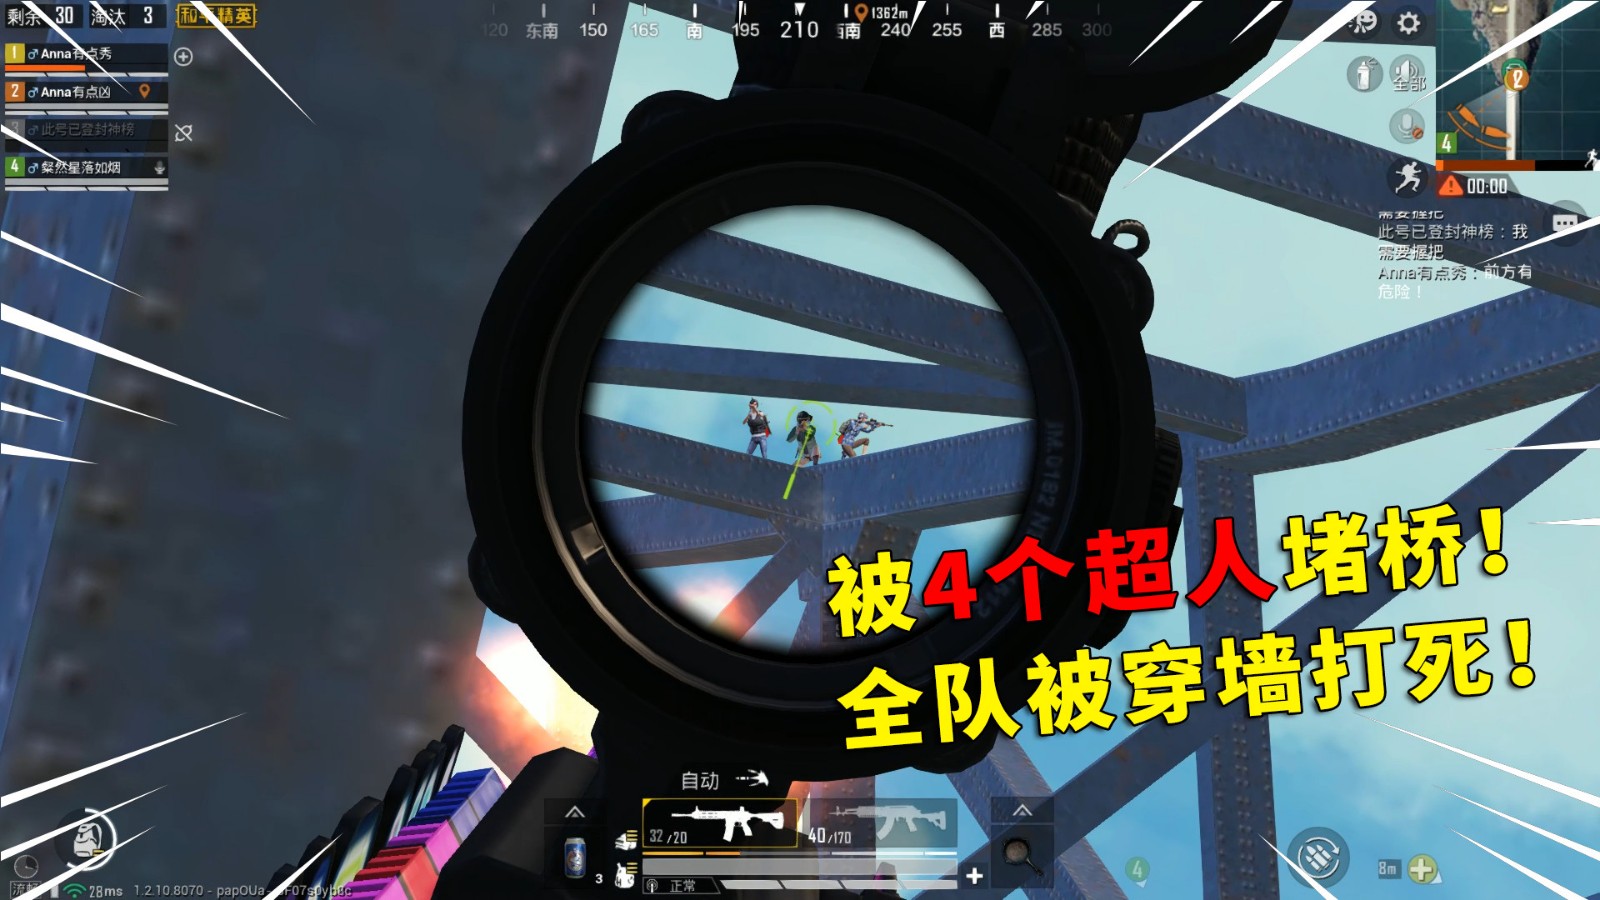 Anna Peace Elite: Meet four Superman, fly directly to the bridge and hit me! The whole team was killed by self-targeting